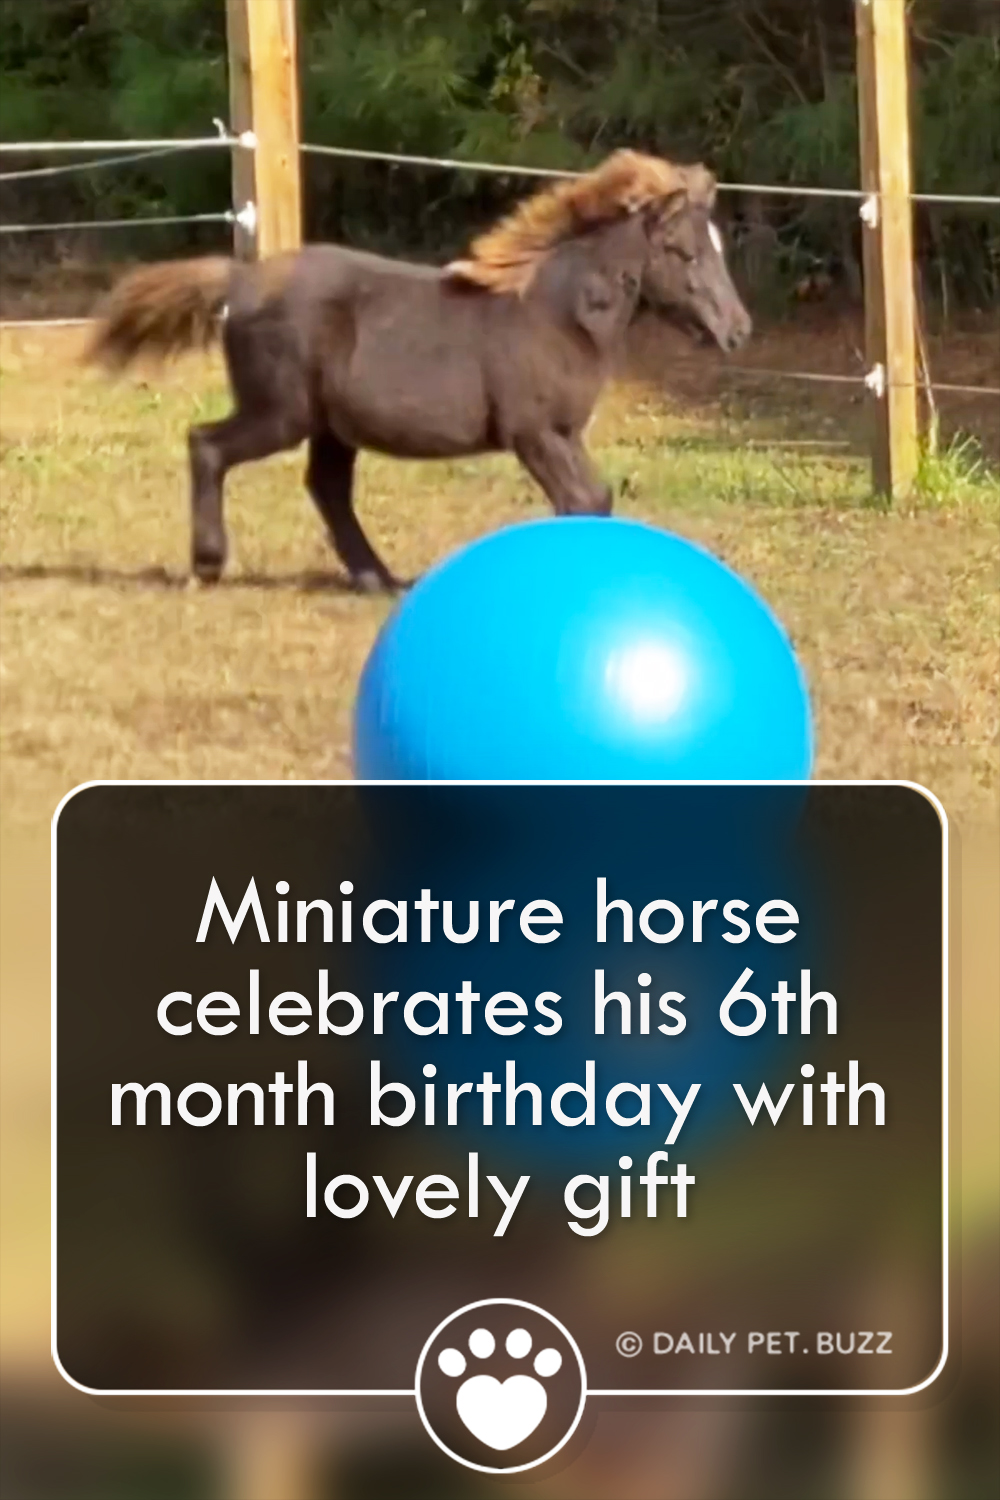 Miniature horse celebrates his 6th month birthday with lovely gift